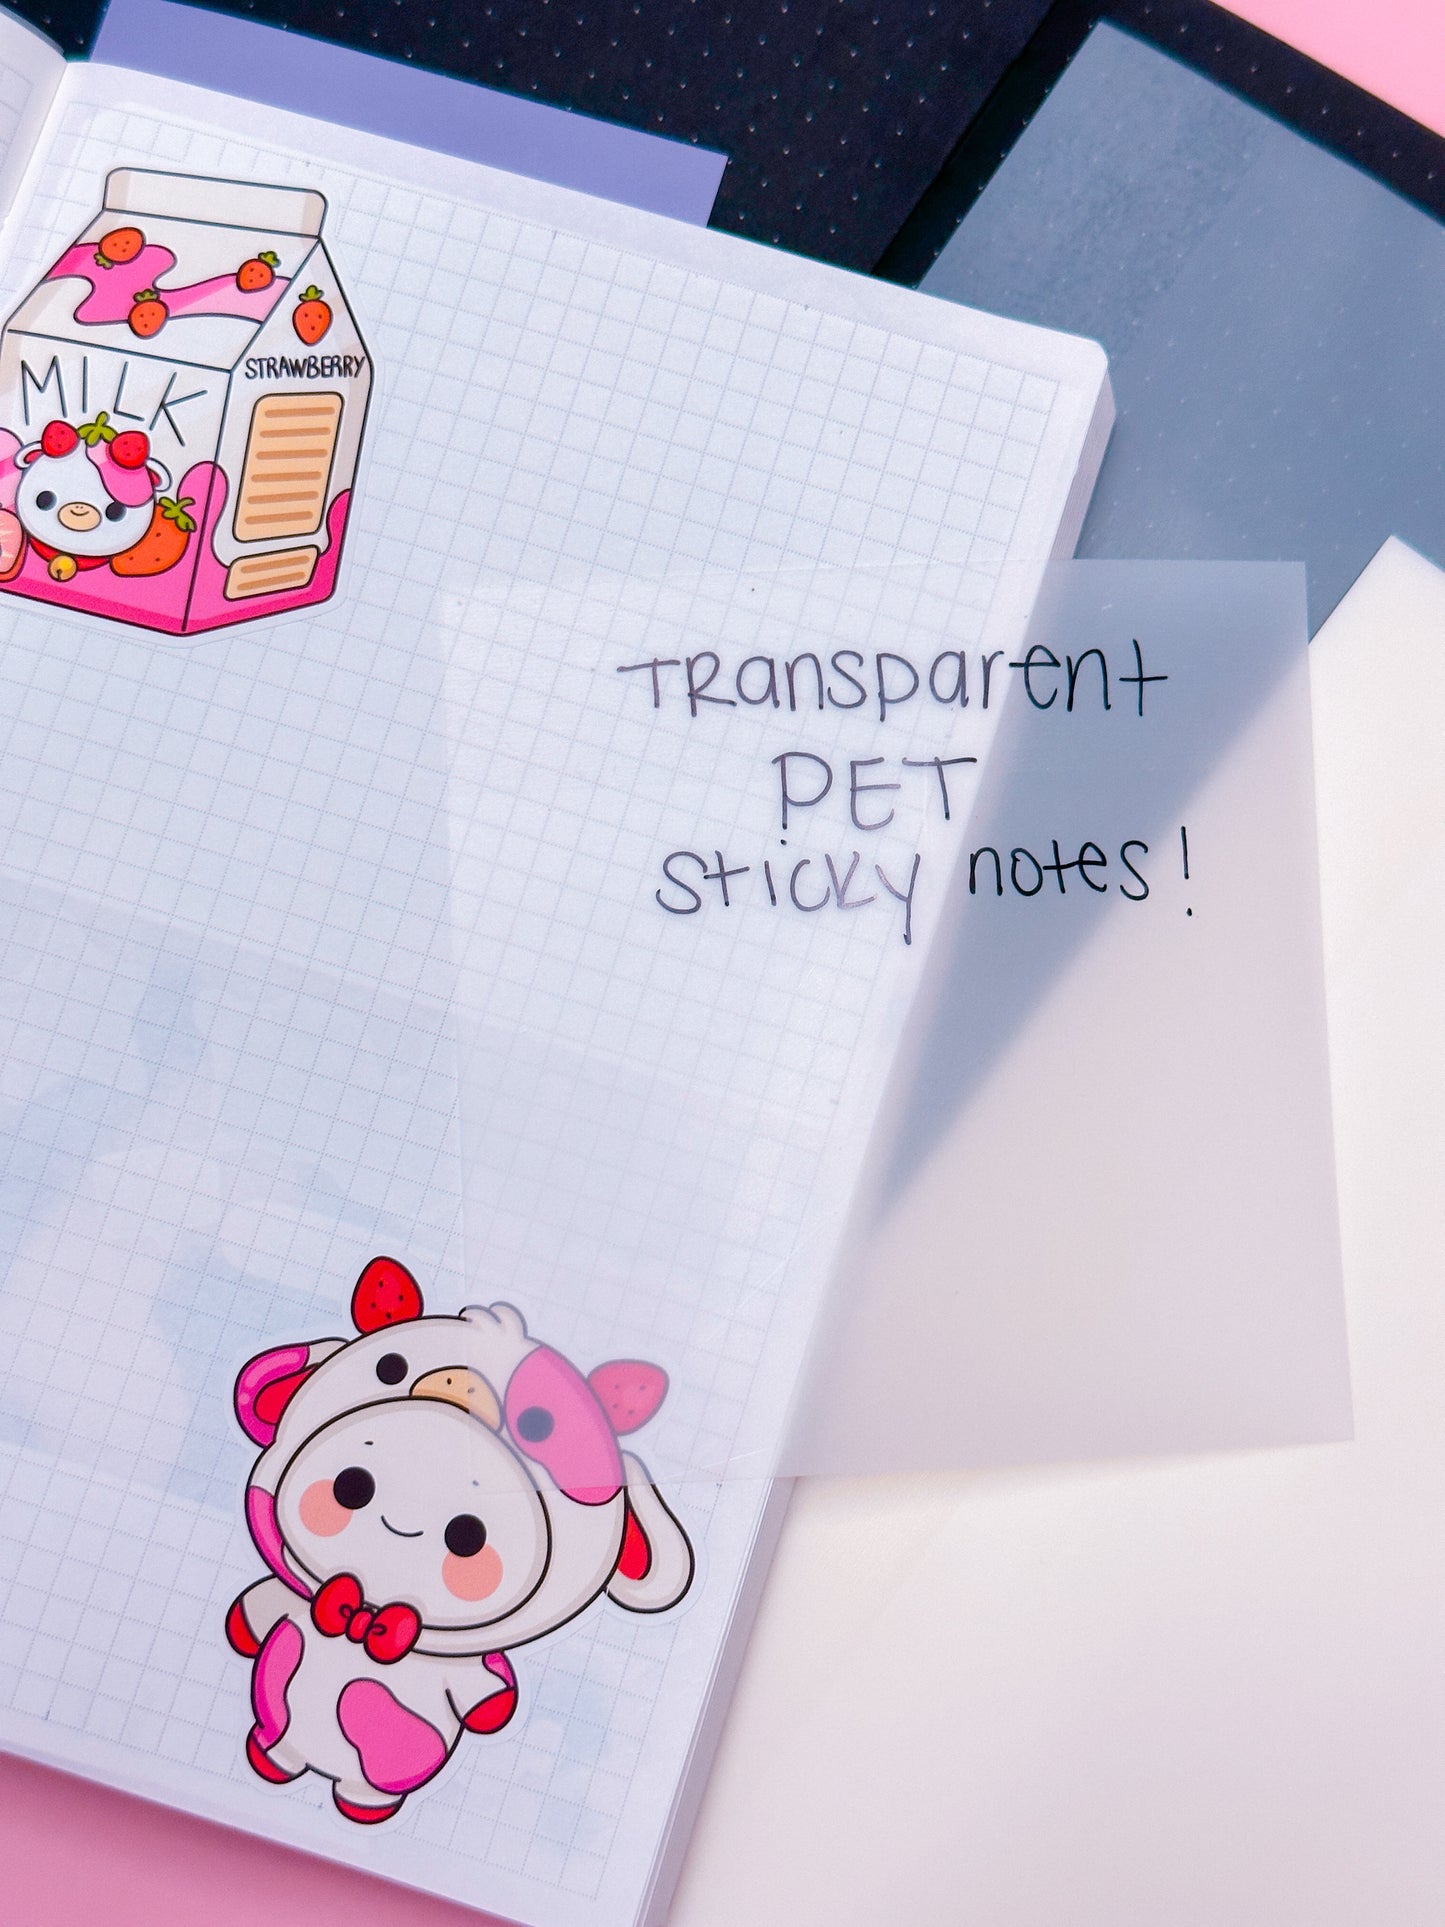 Transparent Sticky Notes - 3x3 Pastel (Clear)